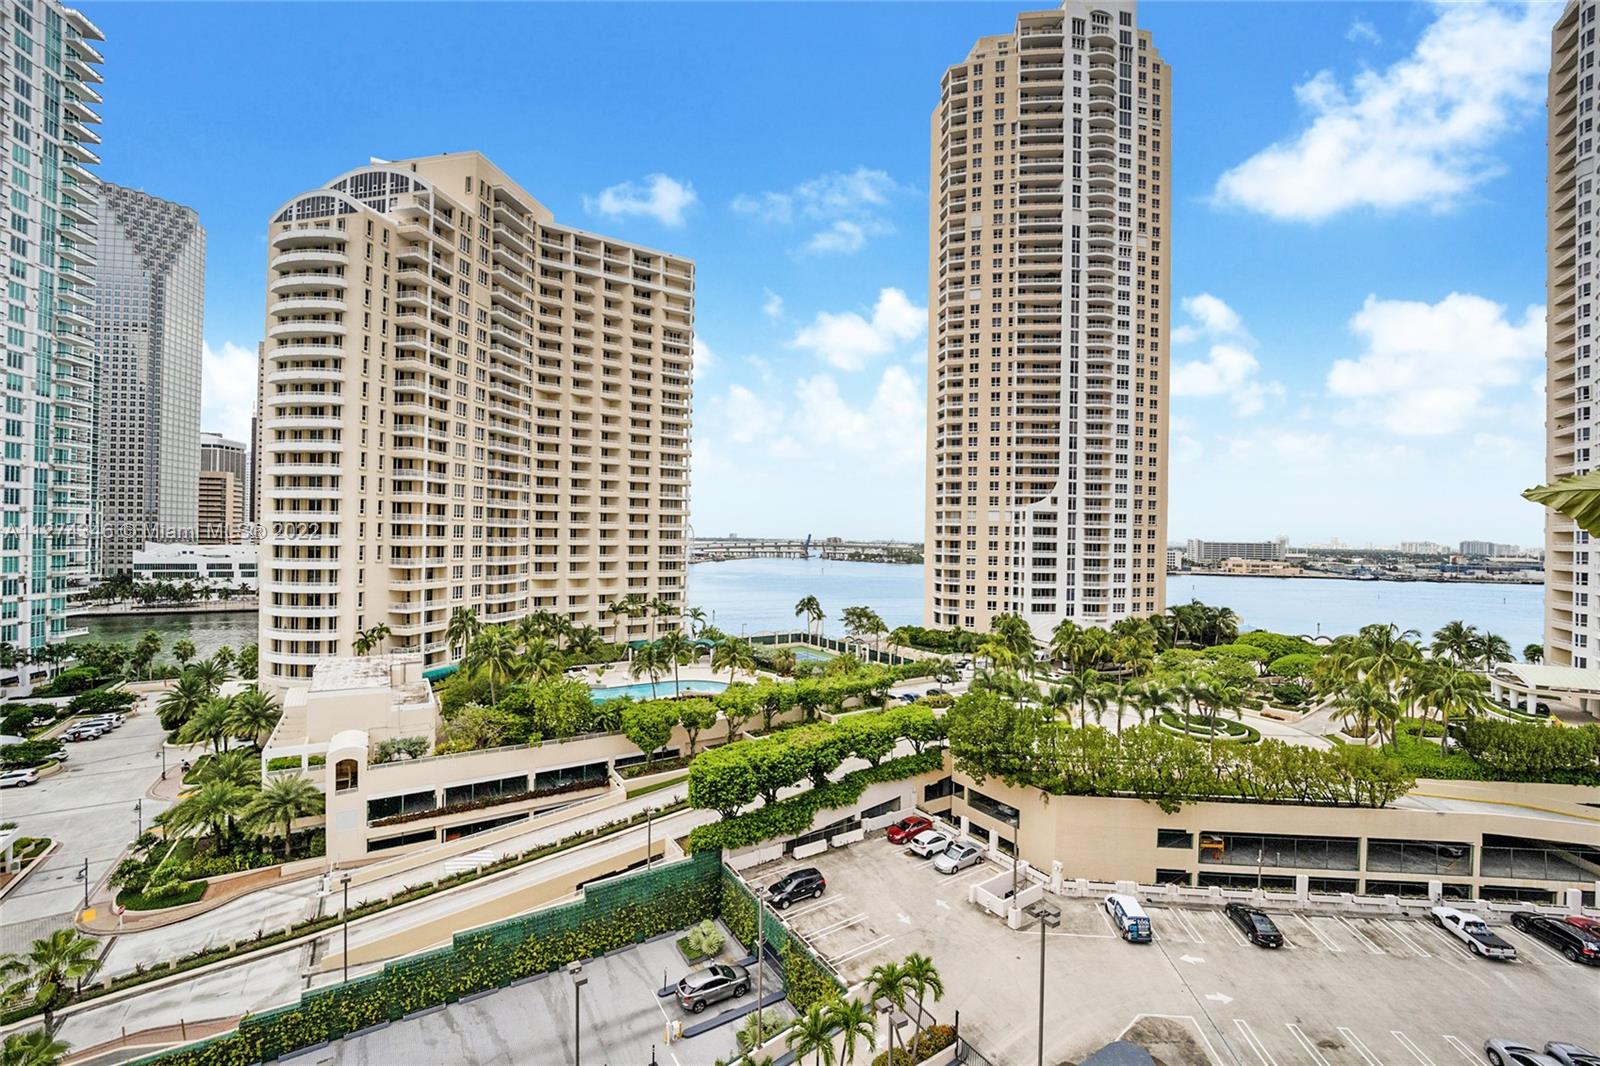 Gorgeous bay view from this corner unit 3-bedroom 3 bath located in Brickell Key, an exclusive island community with shops, restaurants and surrounded by a waterfront Public Linear Park. Living at walking distance to Brickell City Center. Enjoy the bay/city view and tranquility from its oversized balcony, very spacious and naturally bright unit. Great amenities on the building like newly renovated lobby, 24 HR Concierge, valet, BBQ area, tennis court, large pool, gym, sauna, hot tub, child play area, tiki hut, community room, convenience store. FIRST SHOWING IS THURSDAY SEPT 29 5-6PM